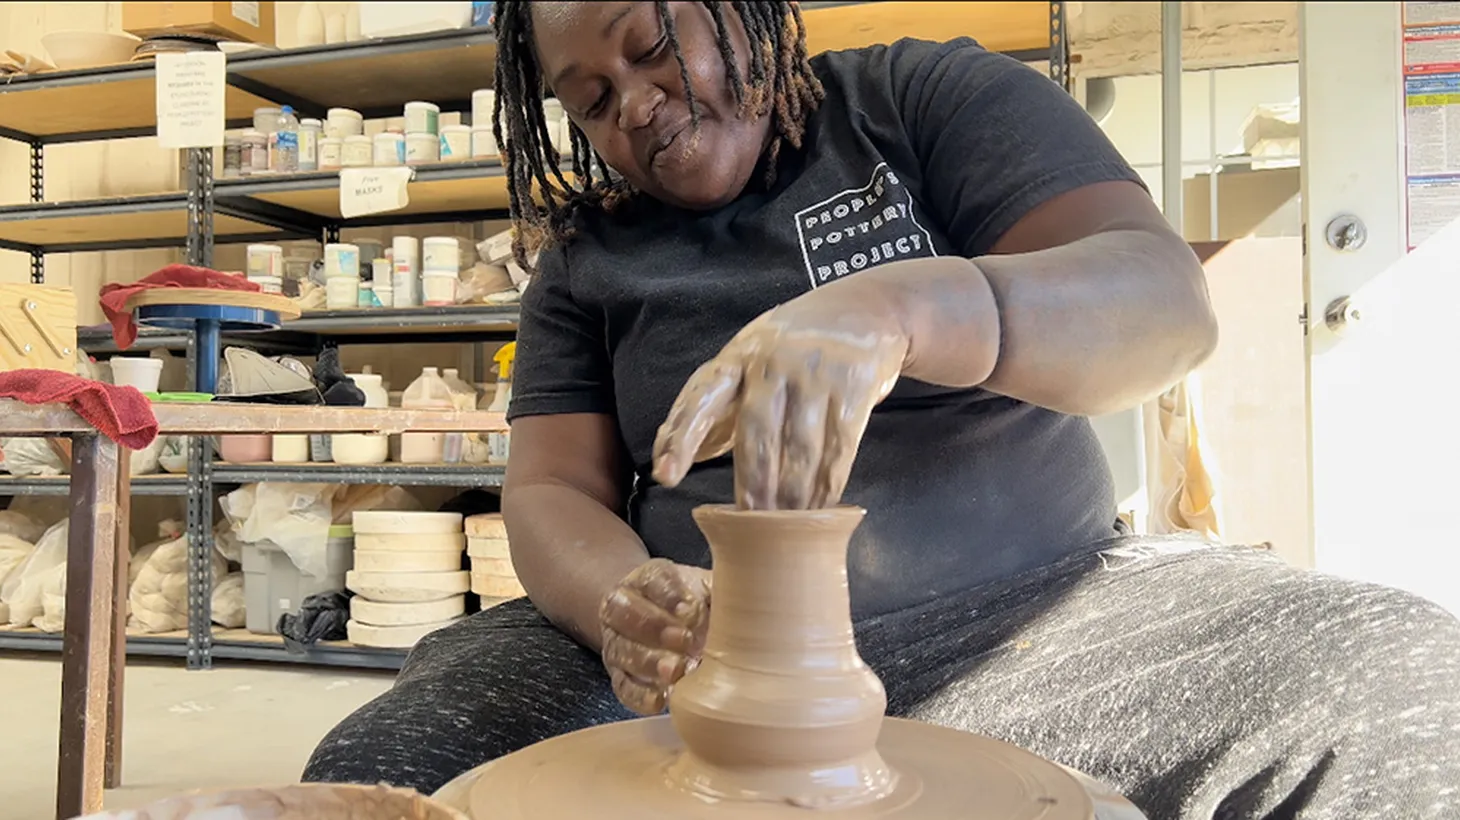 “I'm formerly incarcerated. I served 13 years of my life. But it didn't define me,” says Domonique Perkins, co-founder of People’s Pottery Project.